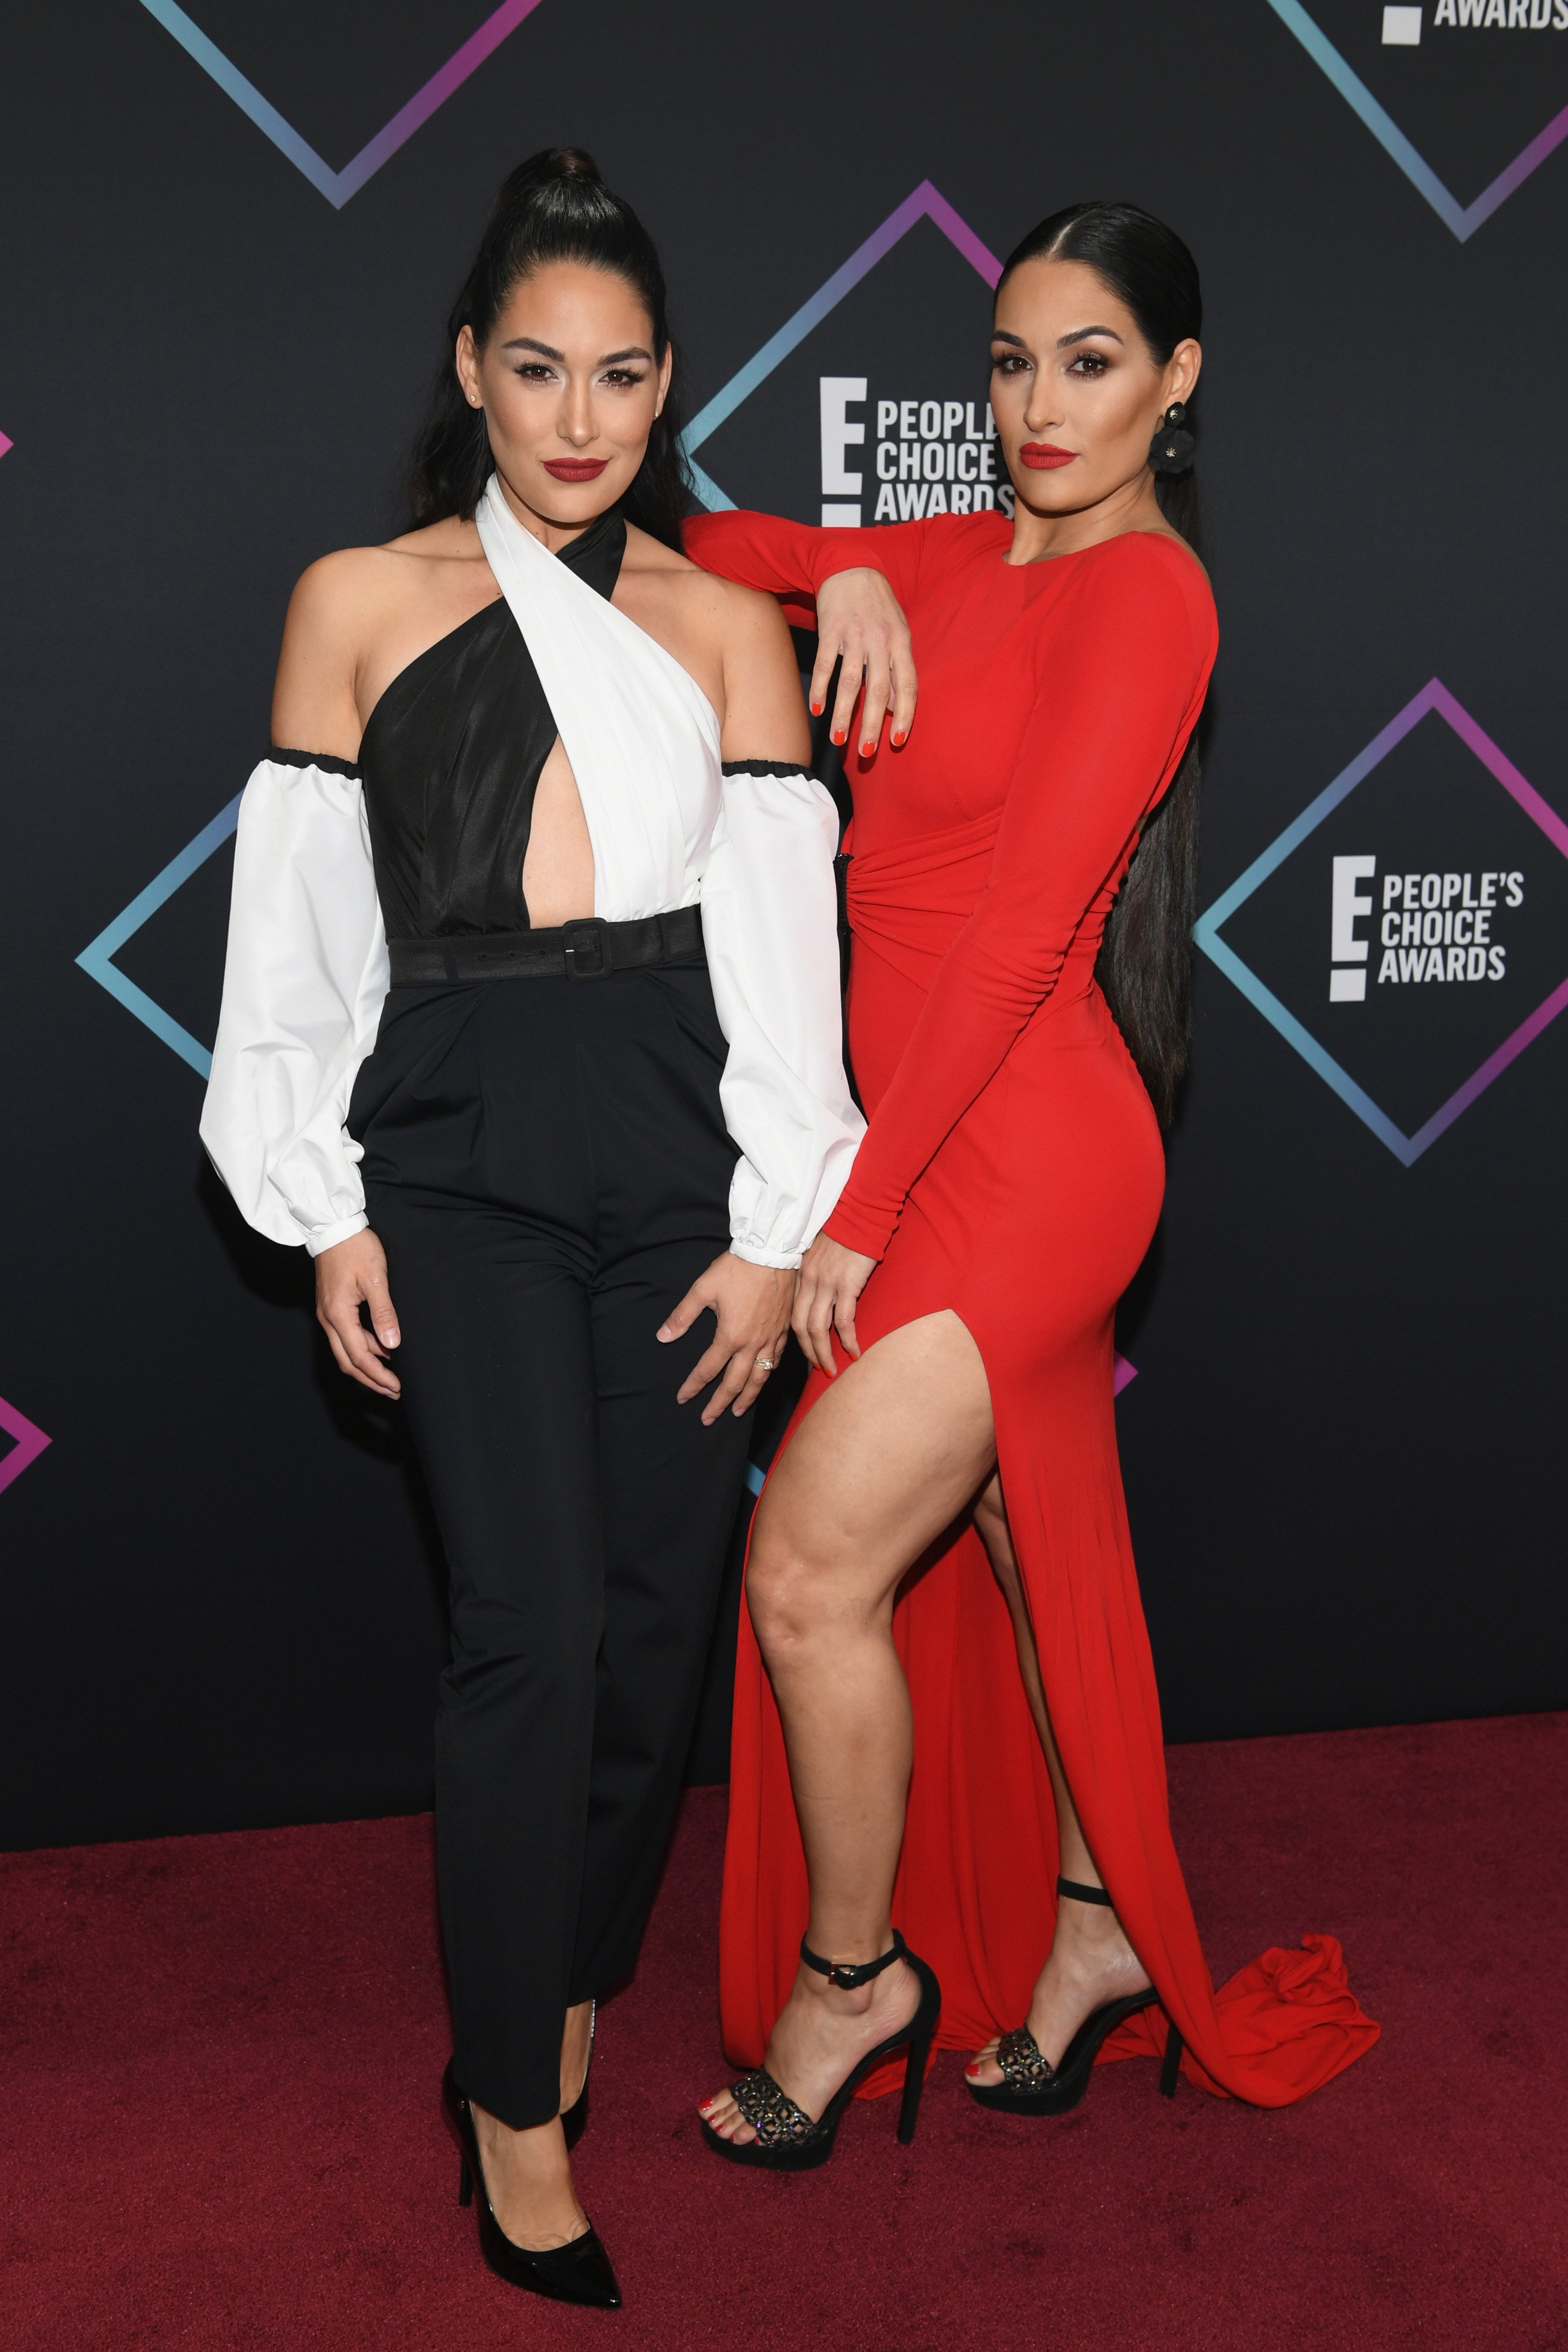 Nikki and Brie Bella pictured at the 2018 E! People's Choice Awards at Barker Hangar. |Photo: Getty Images